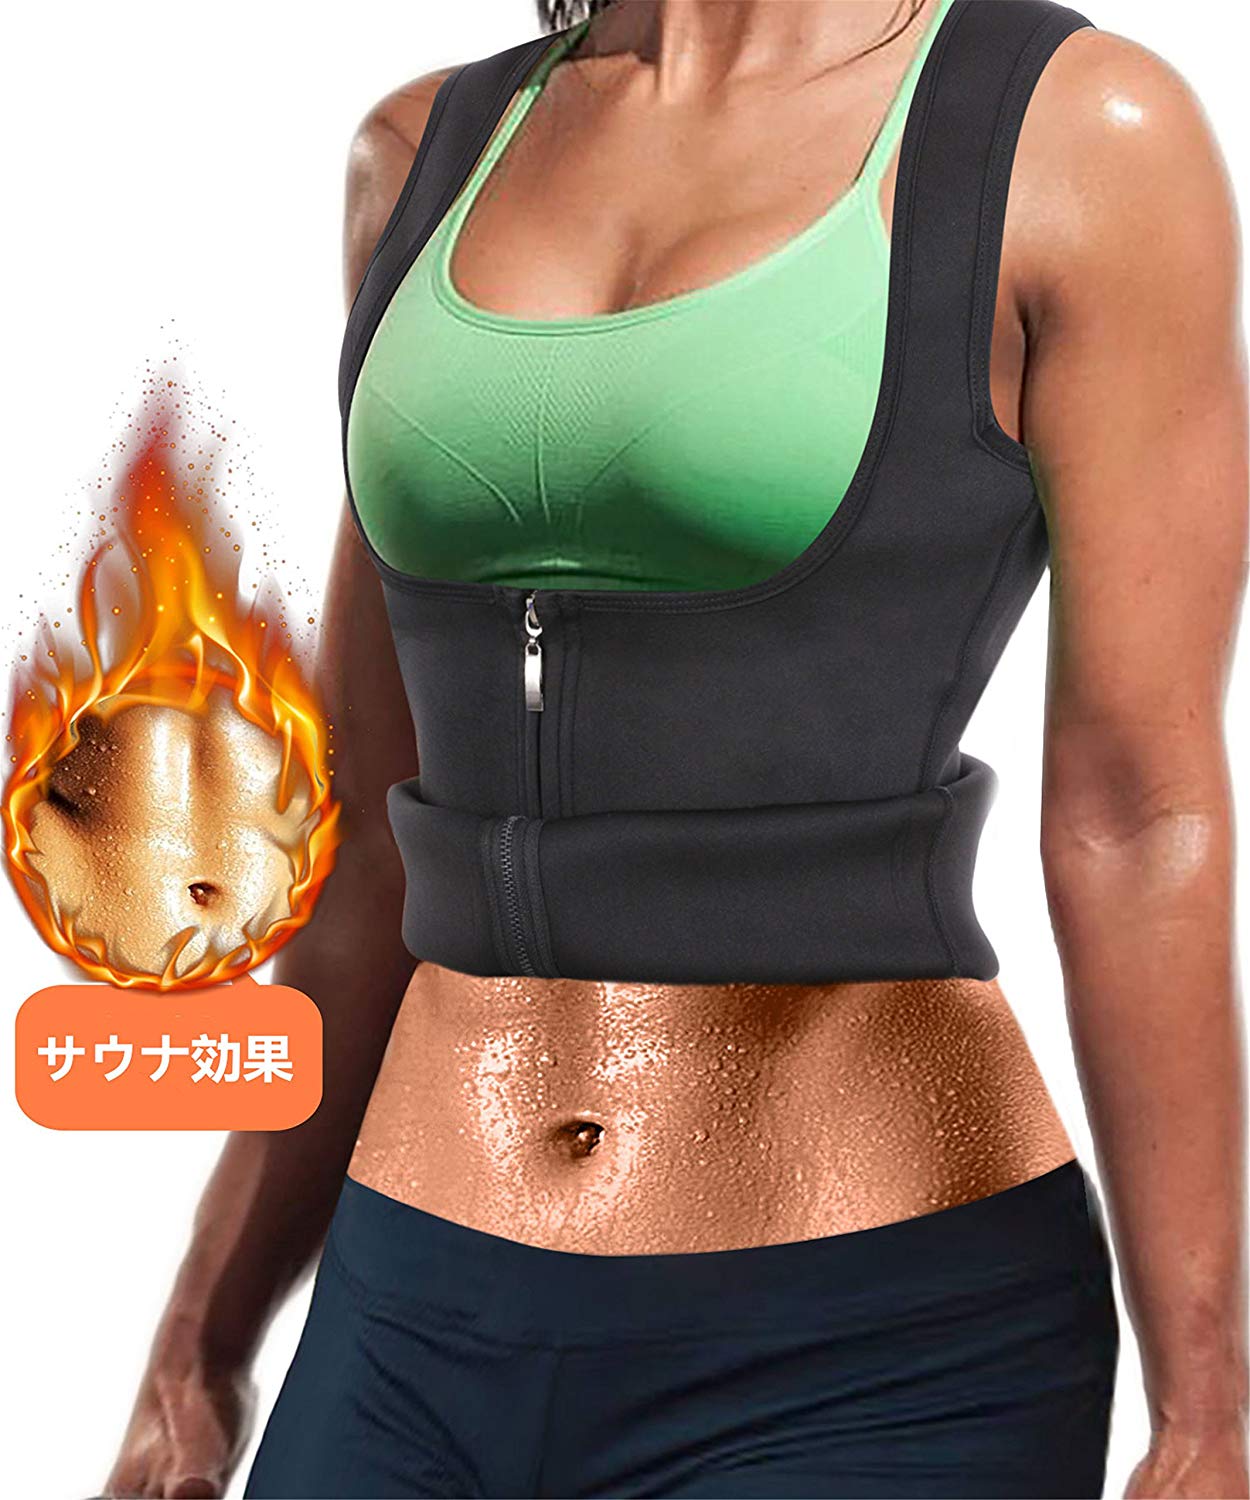 CtriLady Corset for burning fat in the abdomen - buy online from Japan